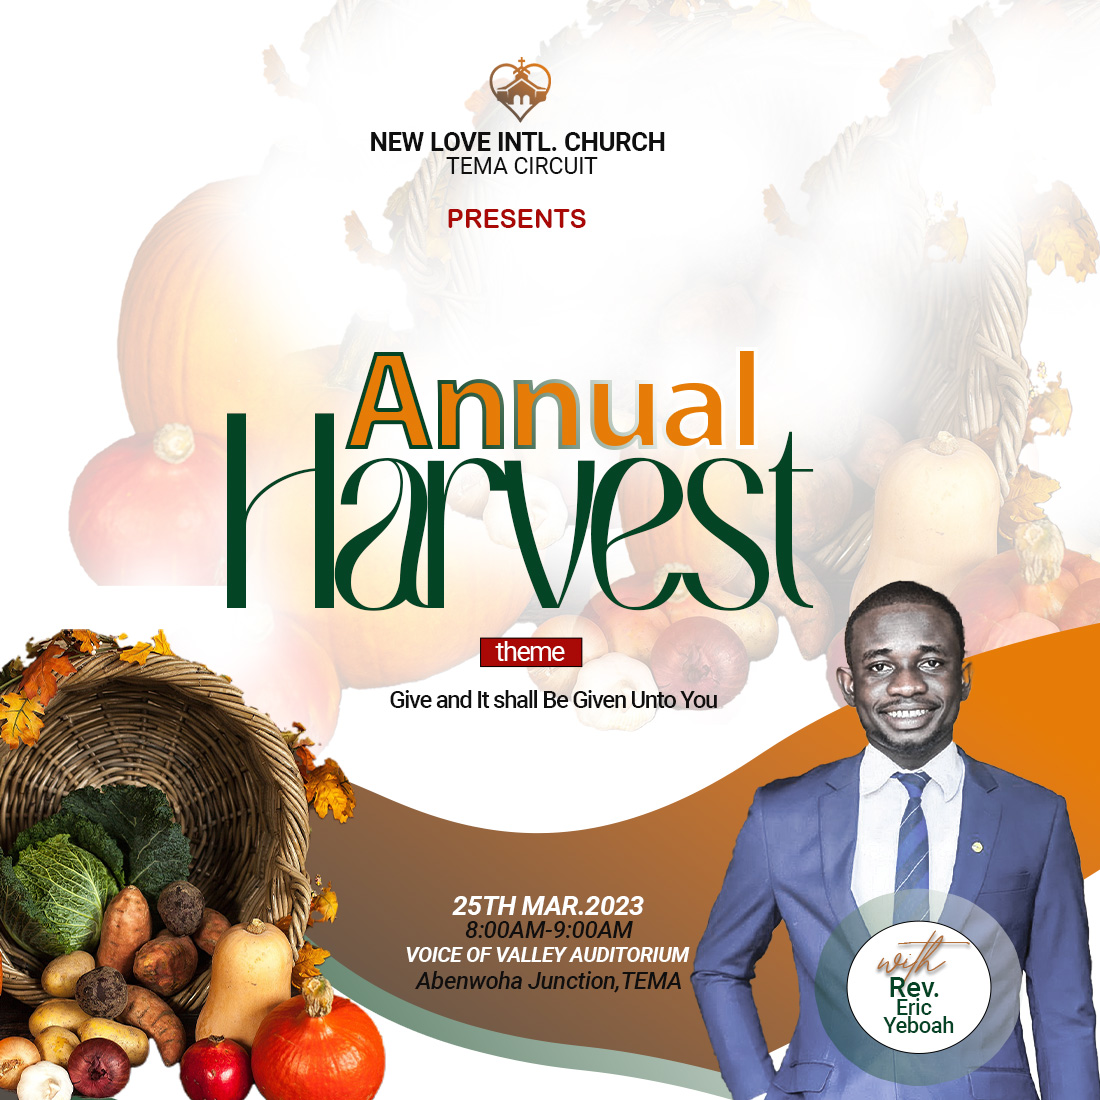 Annual Harvest Church Flyer Design cover image.